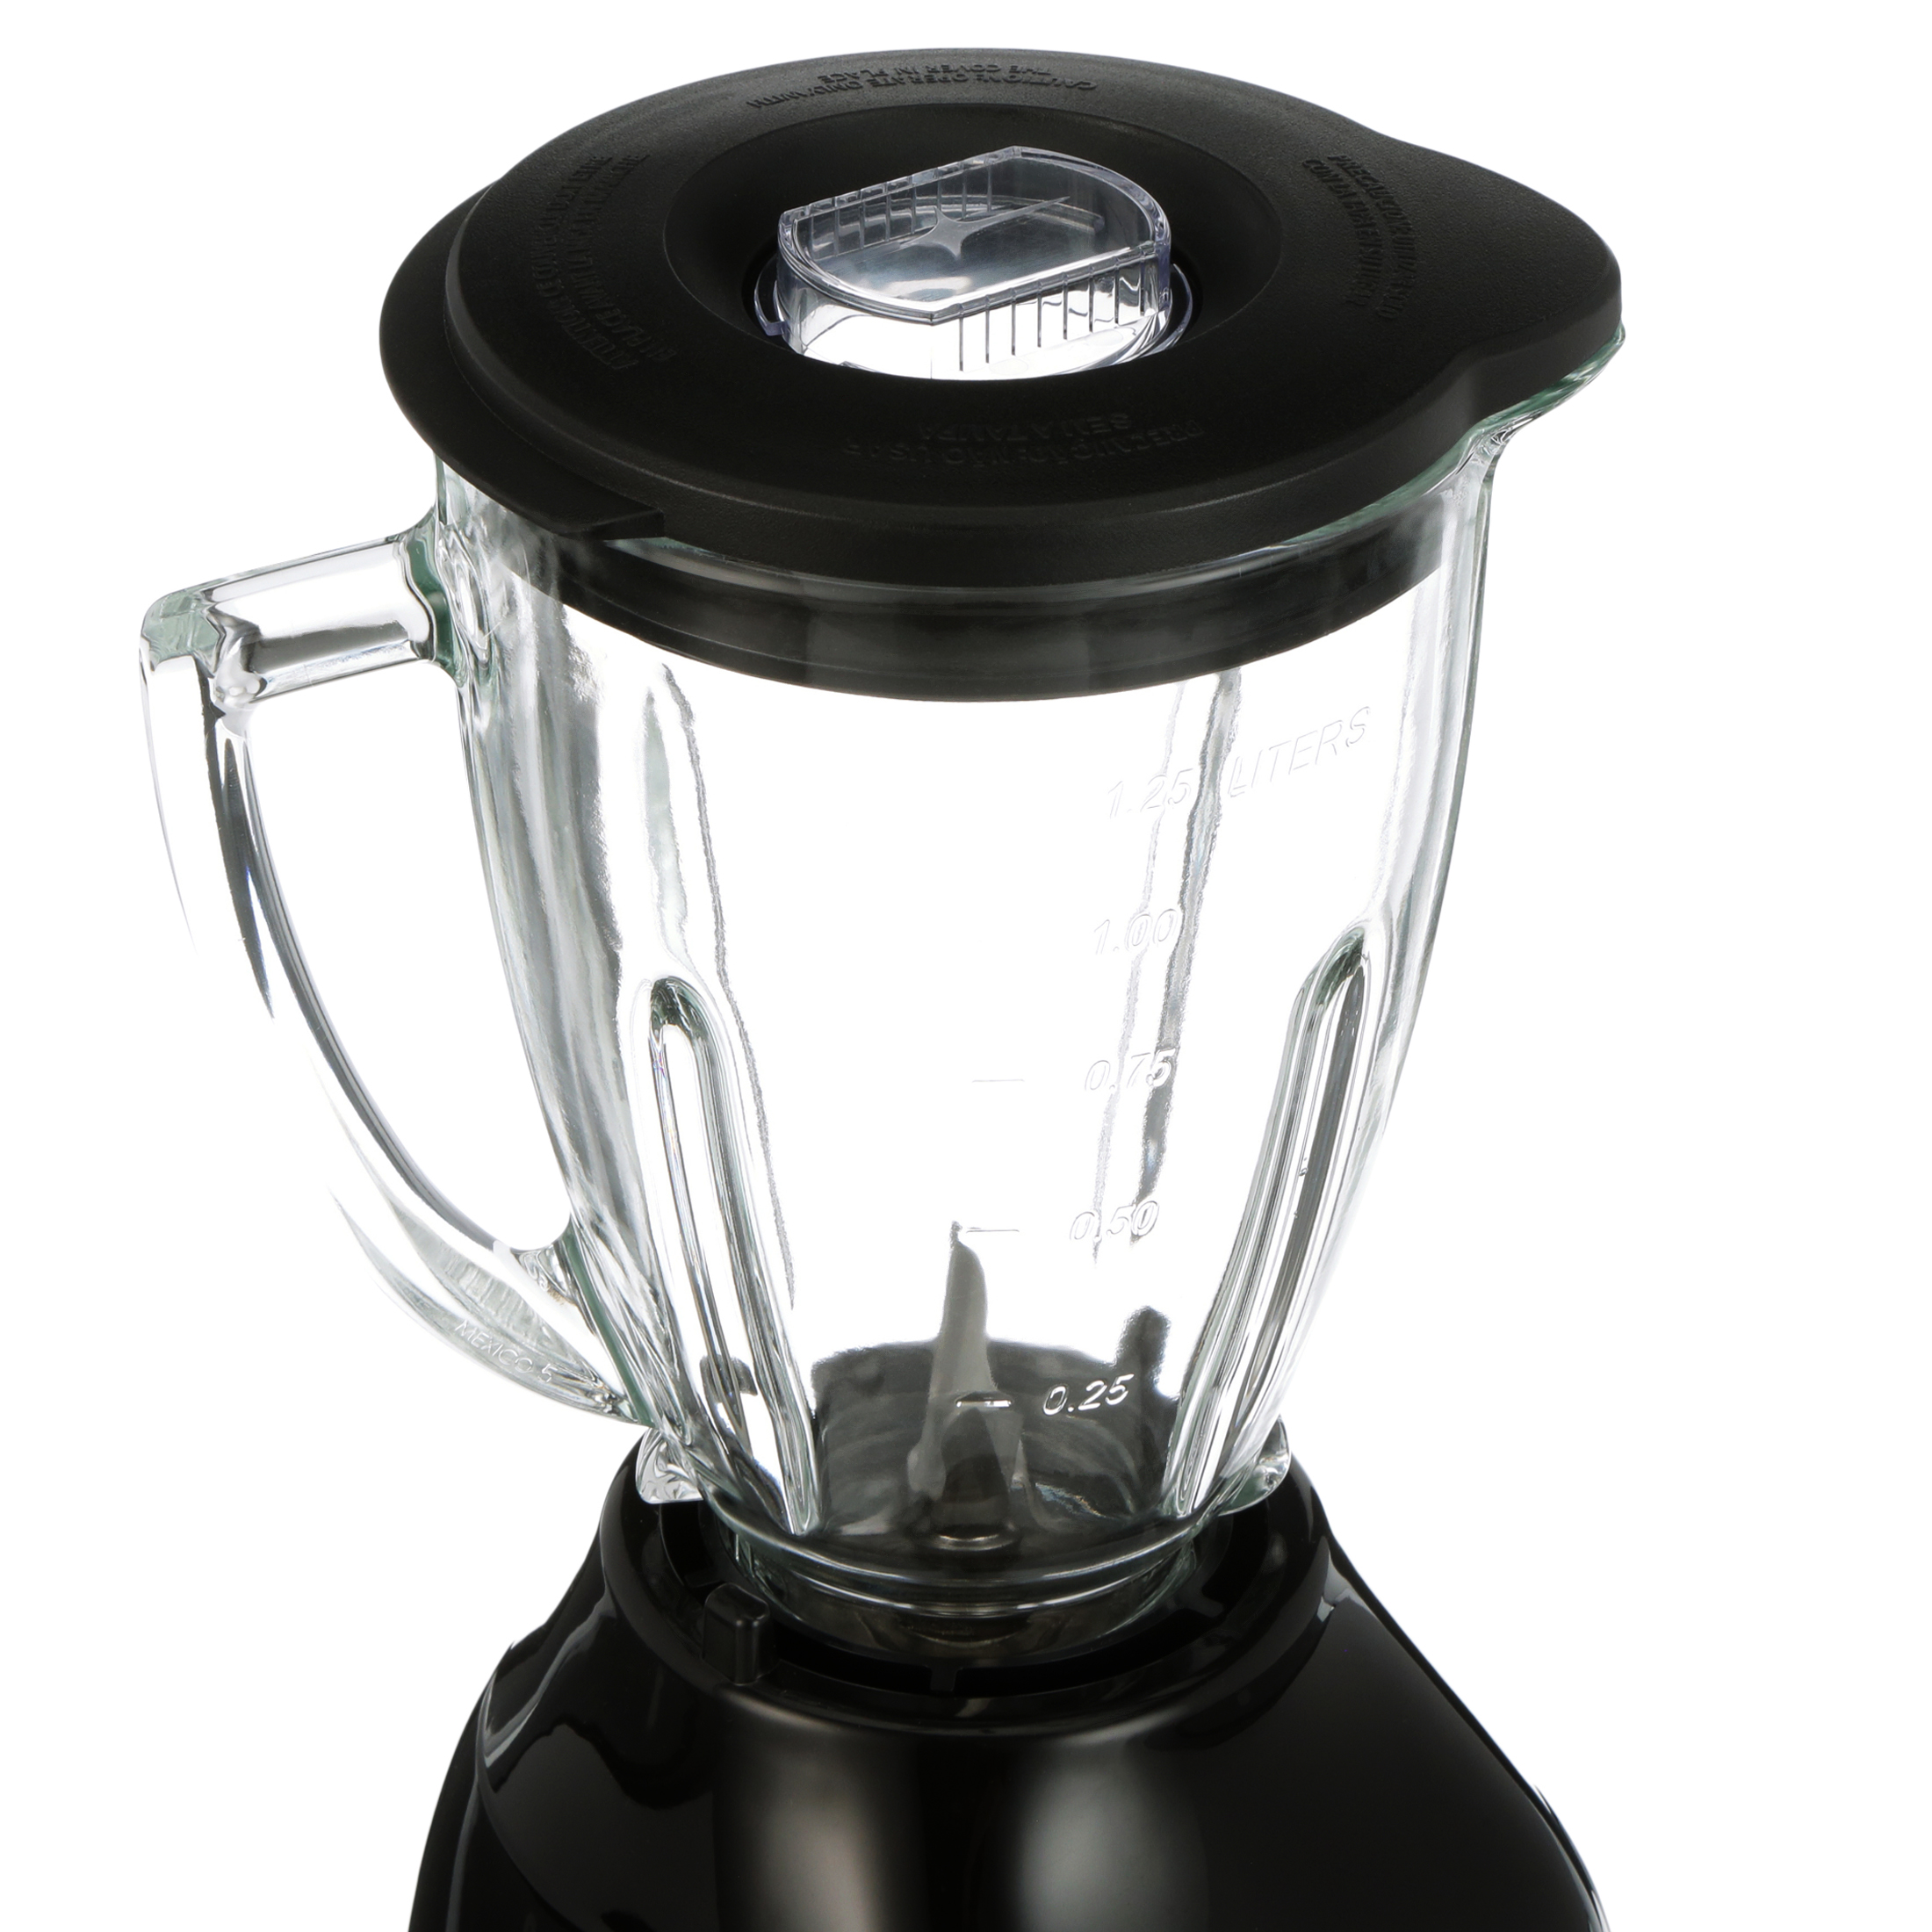 Oster Easy-to-Use Blender with 5-Speeds and 6-Cup Glass Jar, Black, New - image 5 of 9